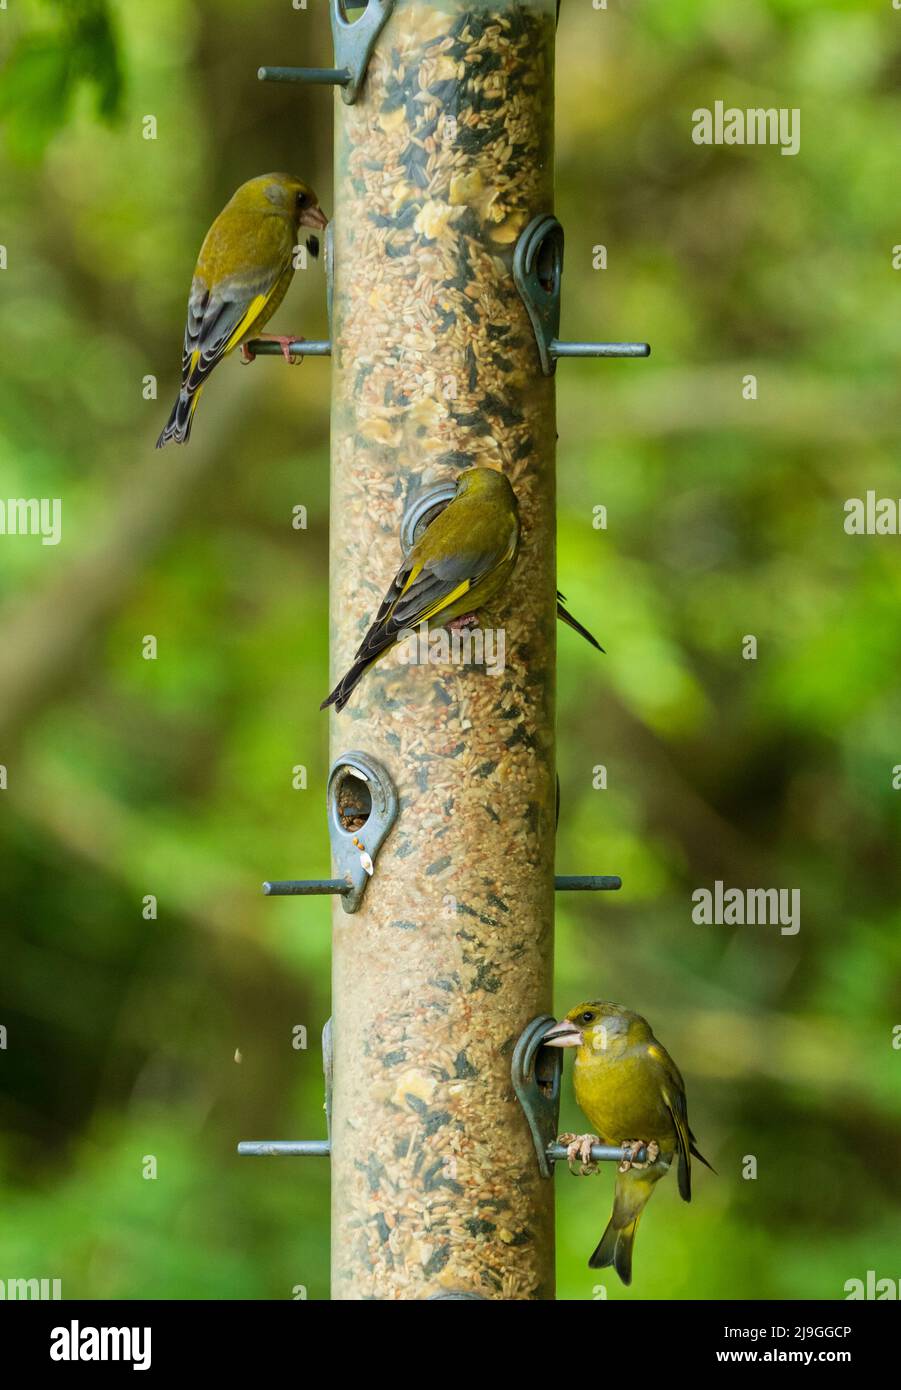 Trio of adult yellow and green UK native greenfinches, Chloris chloris, feeding on a seed and sunflower seed mix Stock Photo